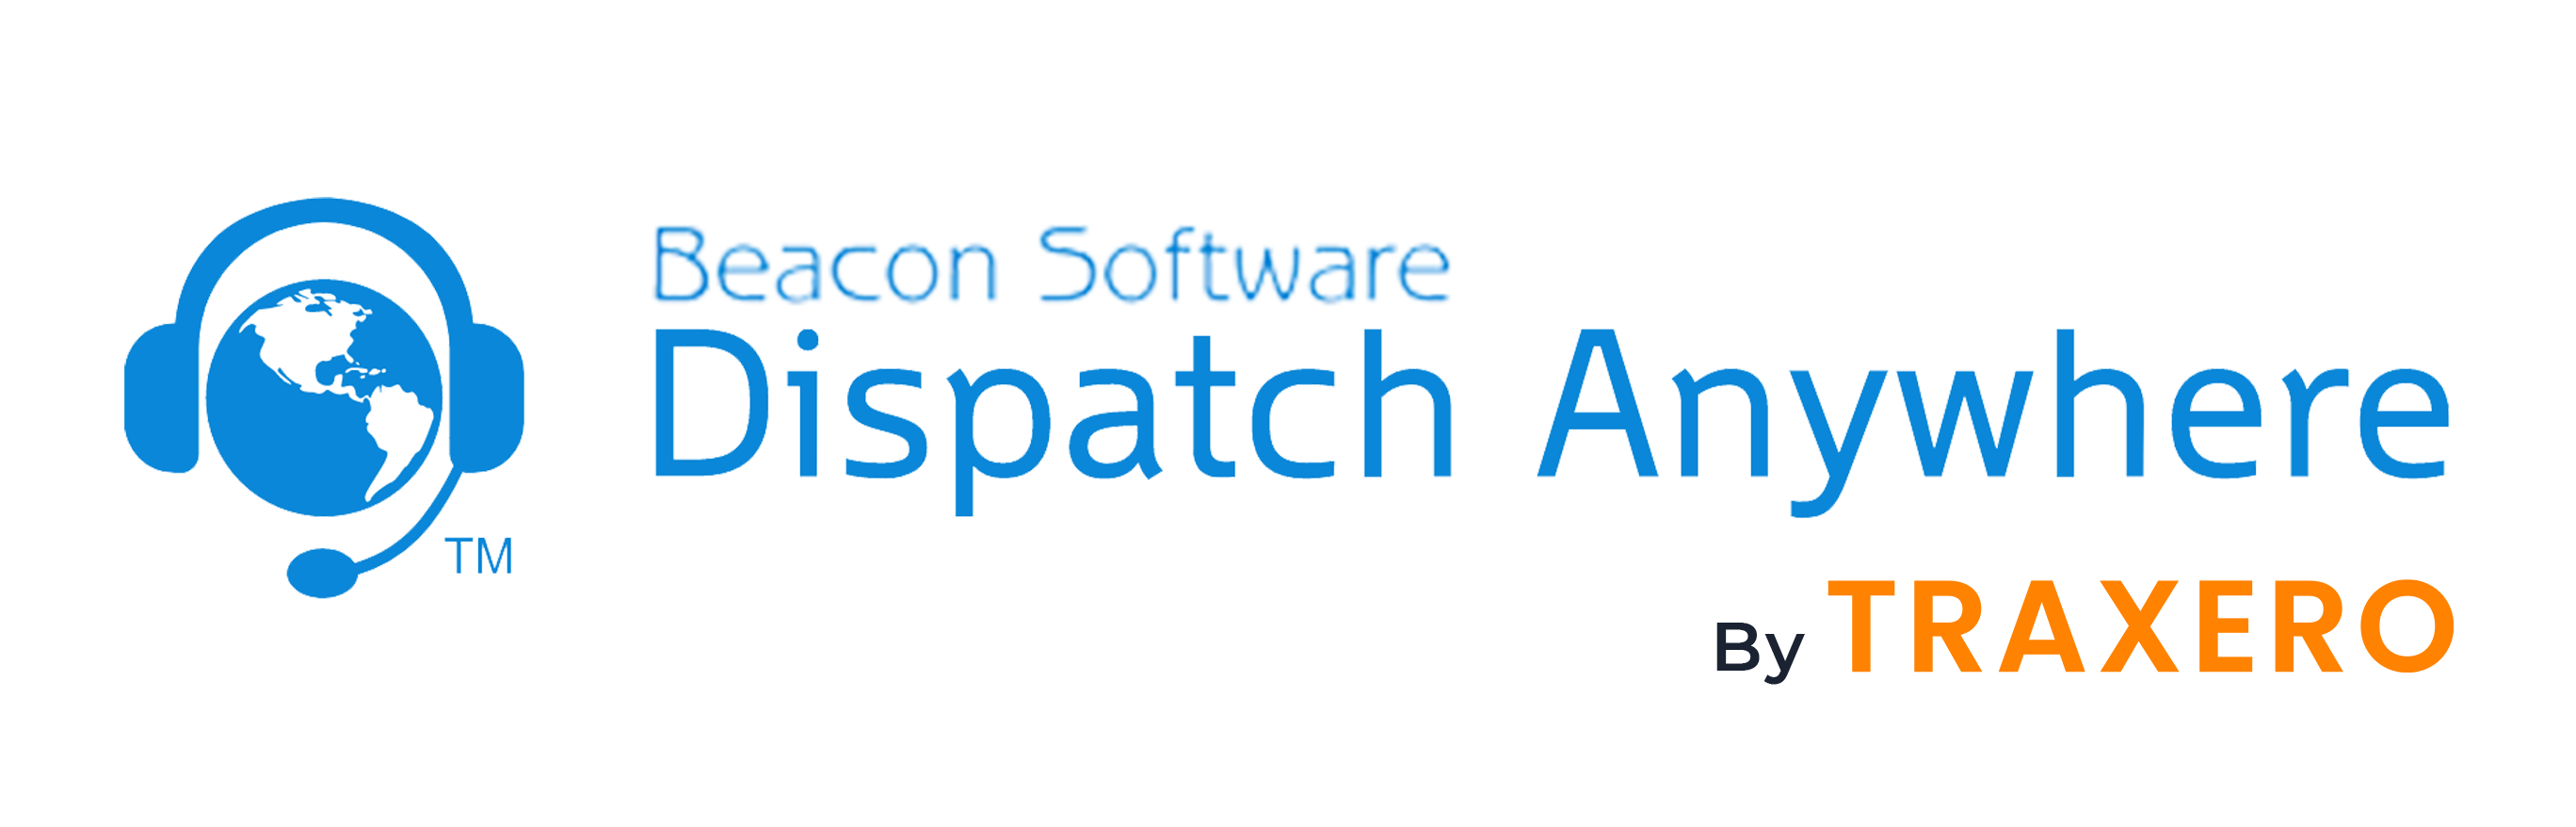 Beacon Software & Dispatch Anywhere